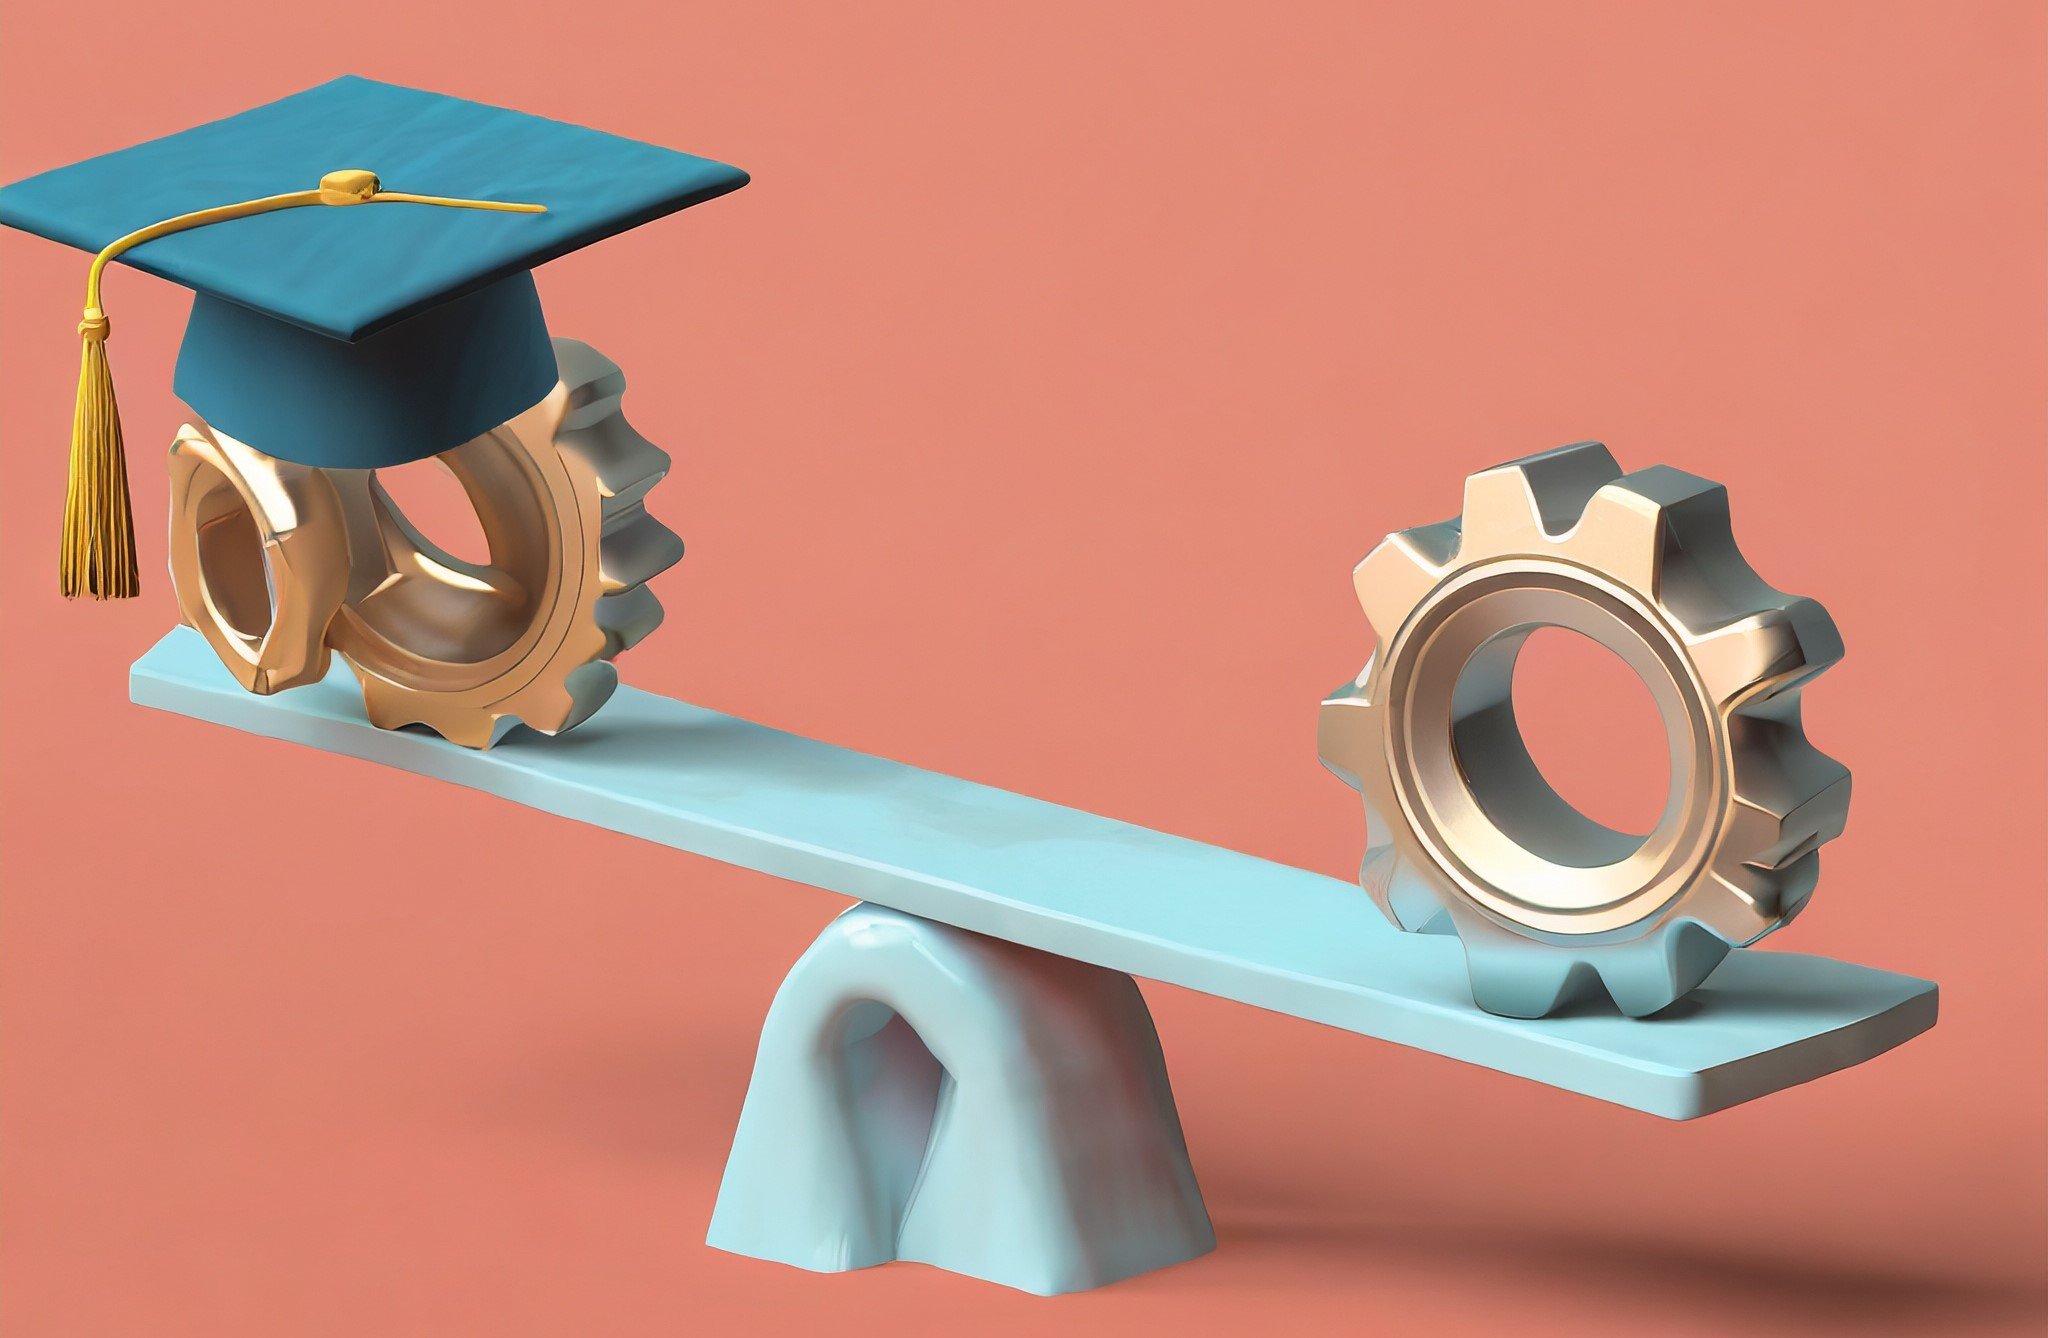 A balance scale. On one side, a traditional graduation cap and on the other, a set of tools or gears.